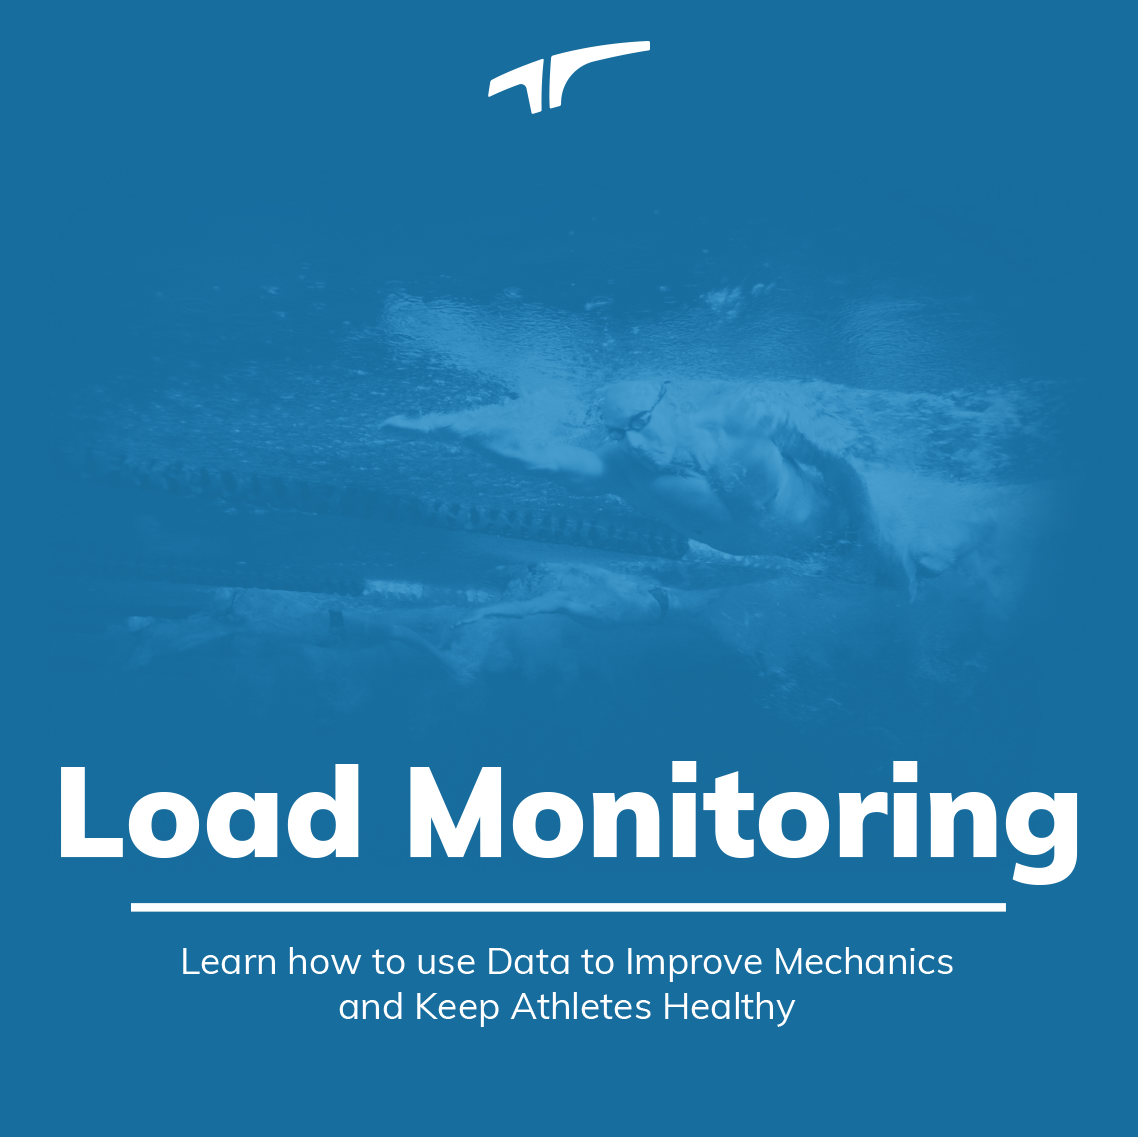 Guide to Load Monitoring